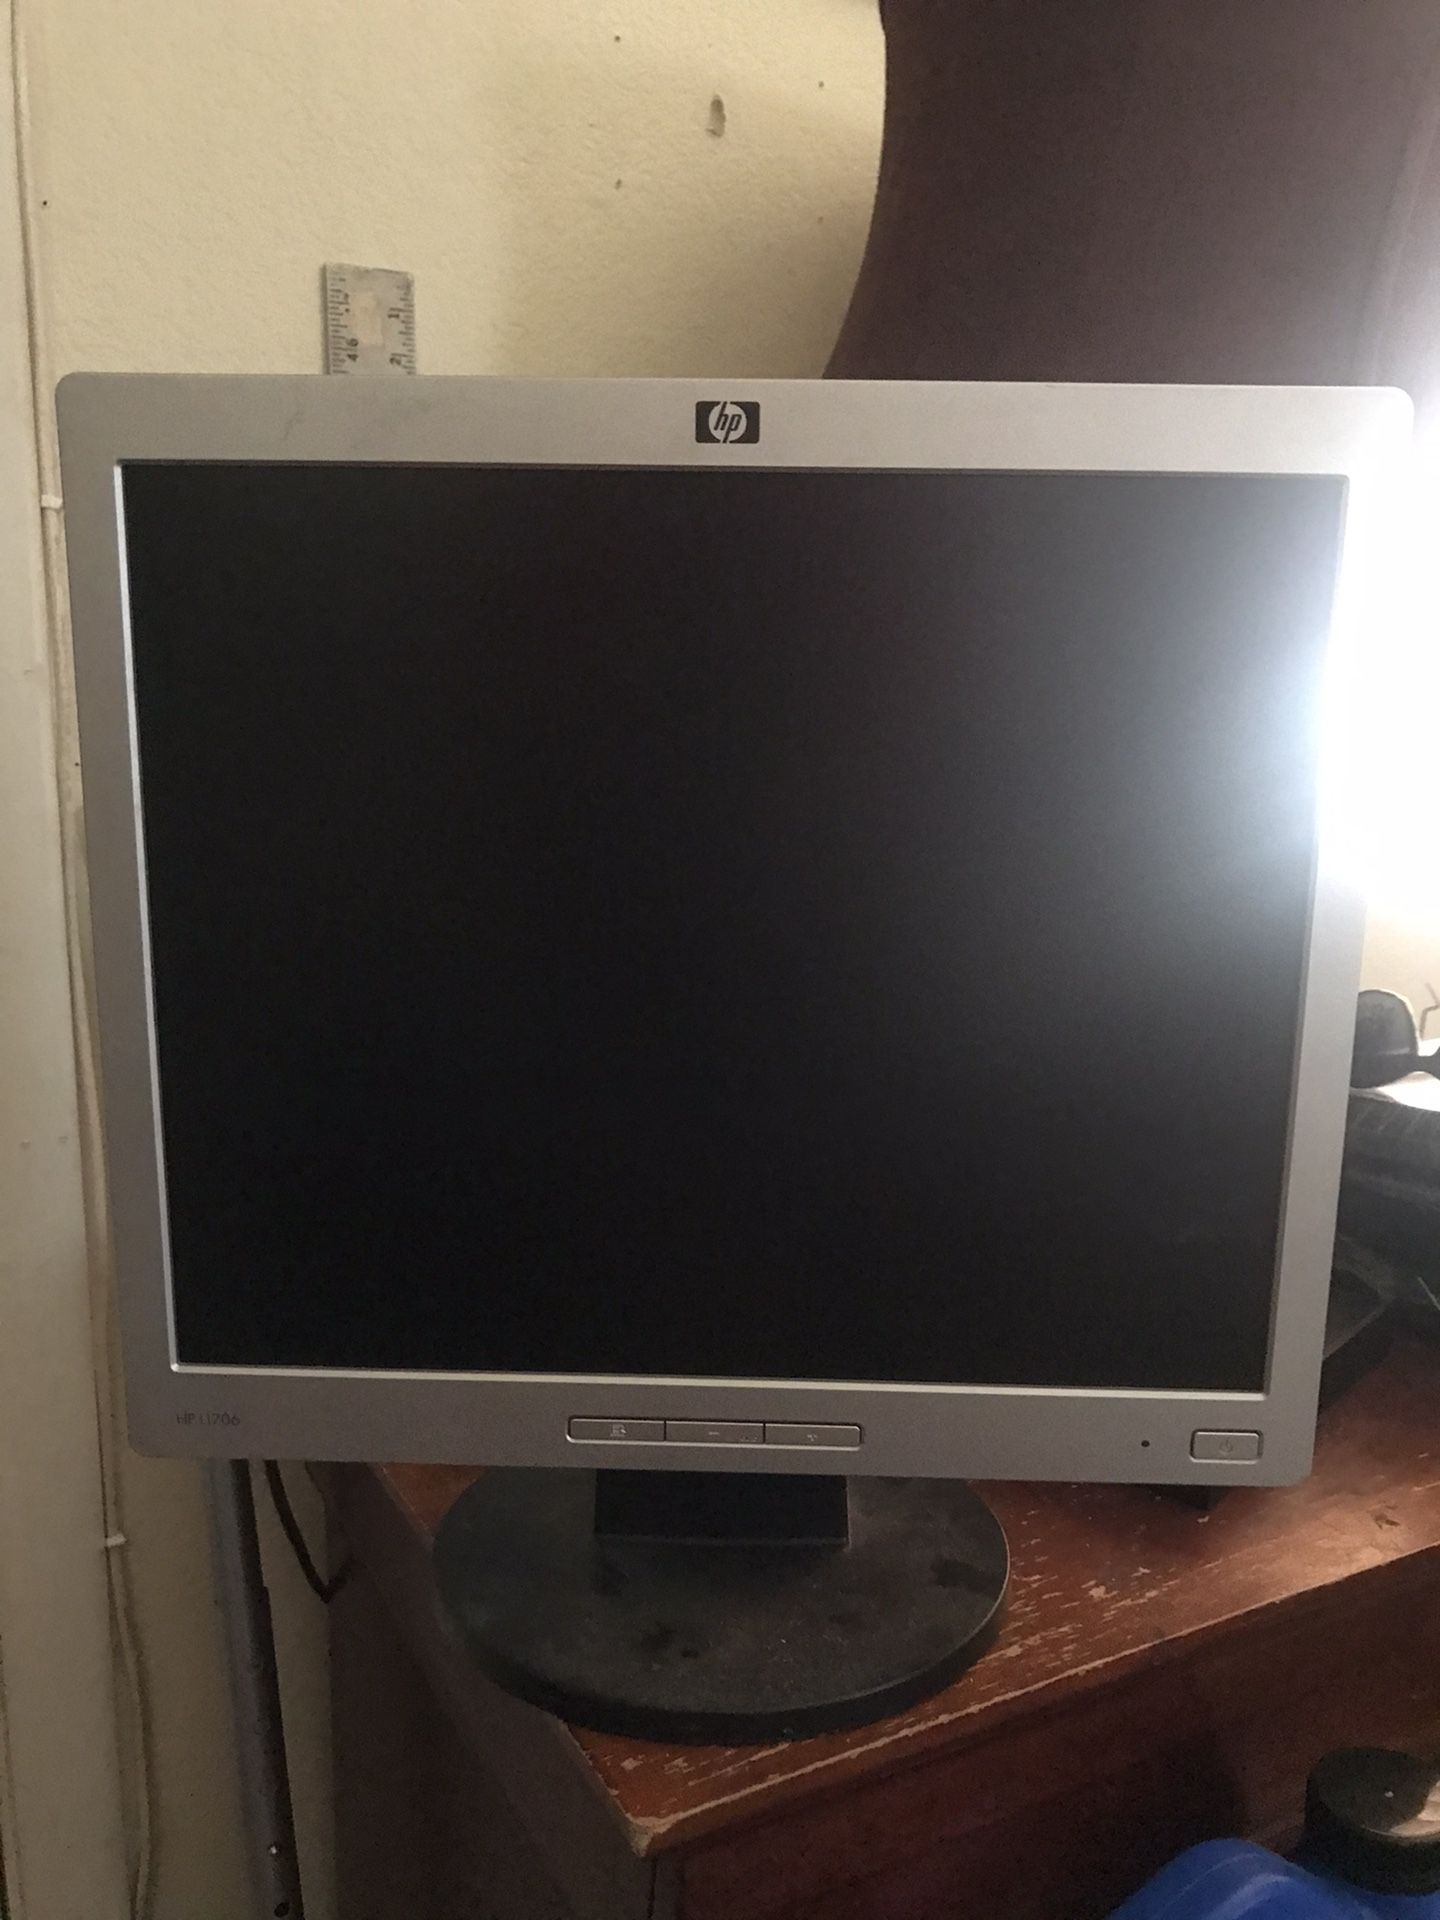 17 in flat screen monitor & 2 printers $33 for all